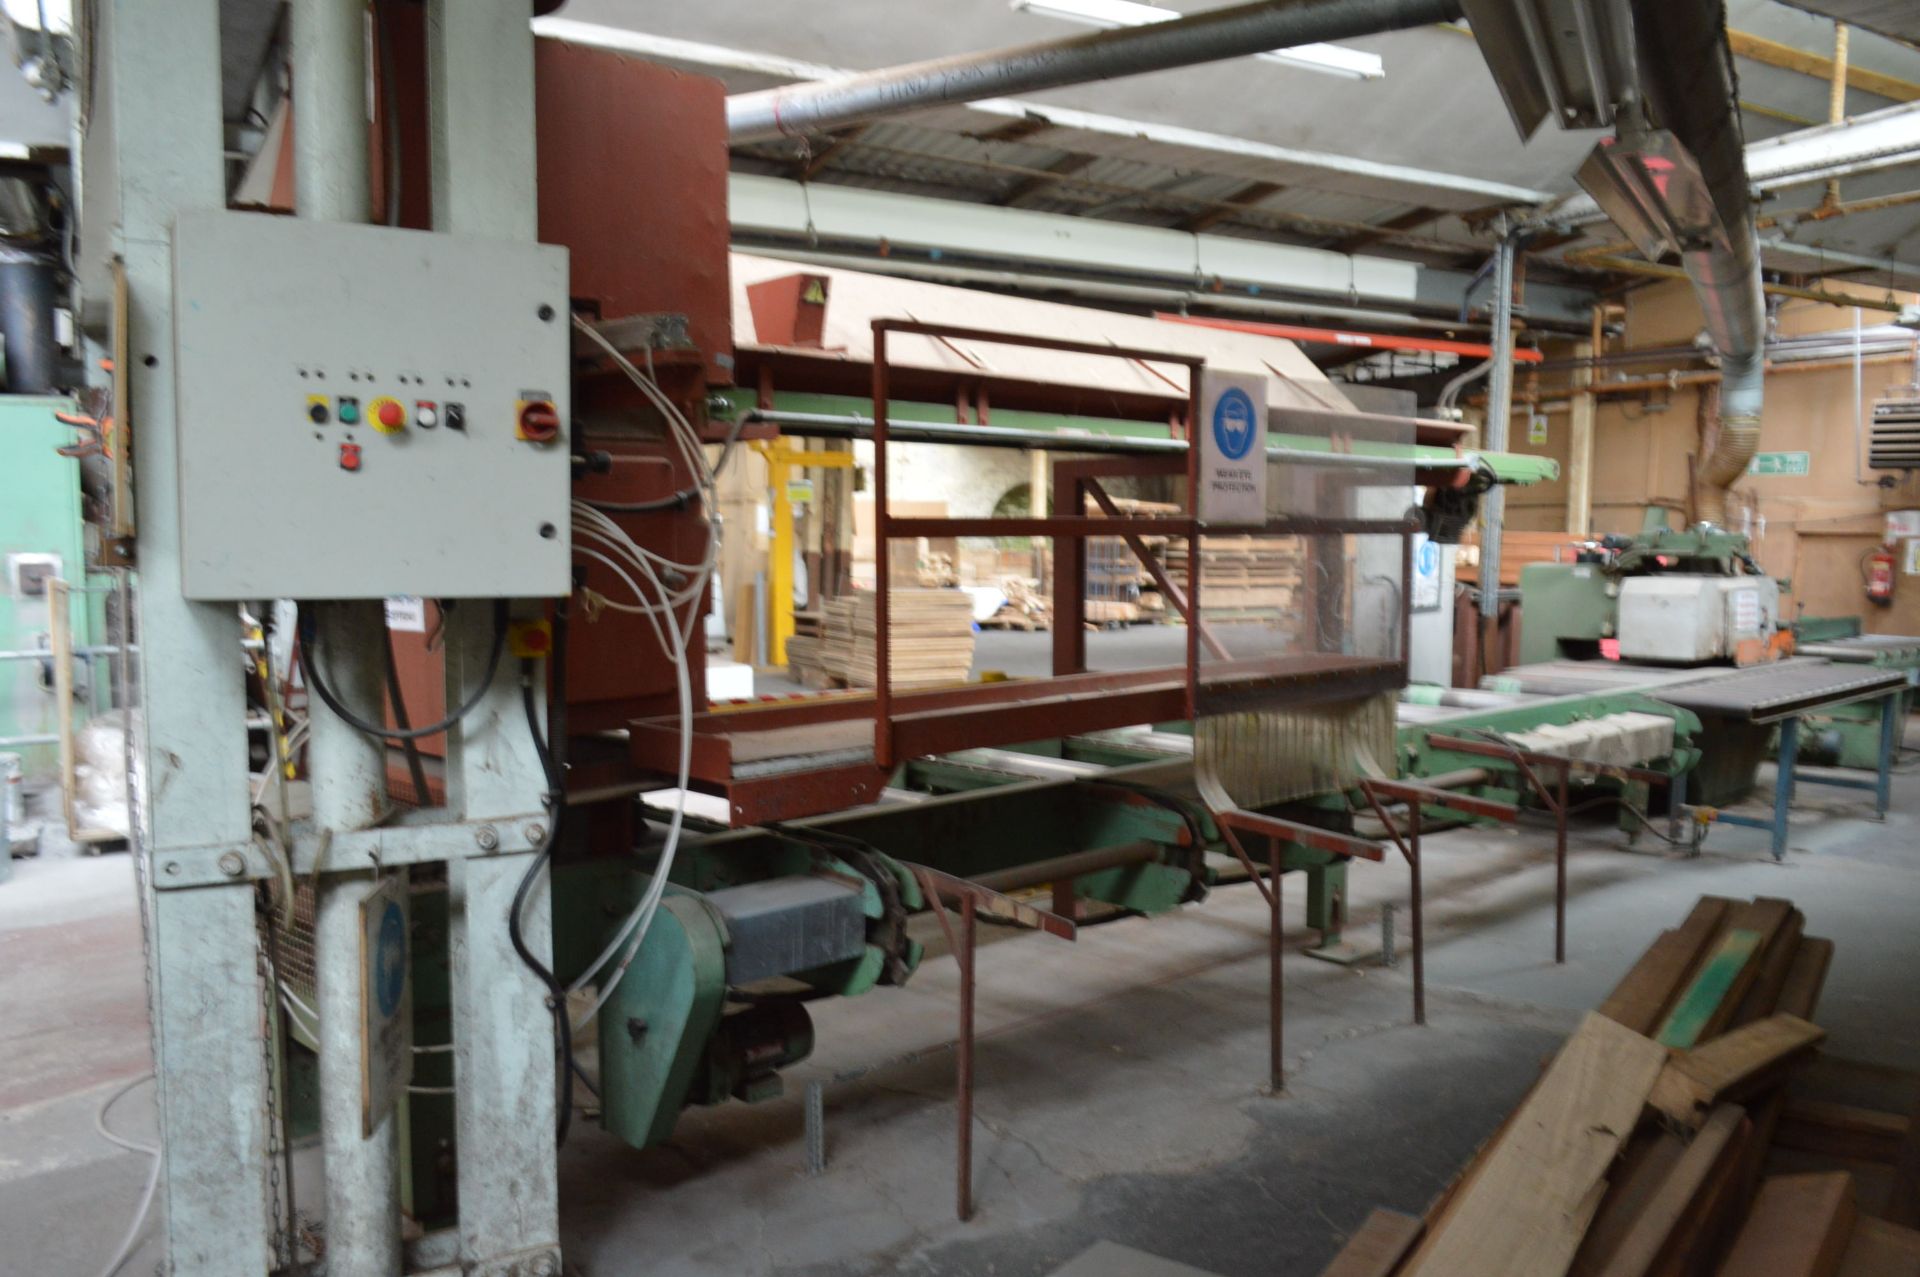 Pinheiro AMA-300A MULTI RIP SAW, serial no. 471, with Wadkin Bursgreen roller table and side - Image 4 of 11